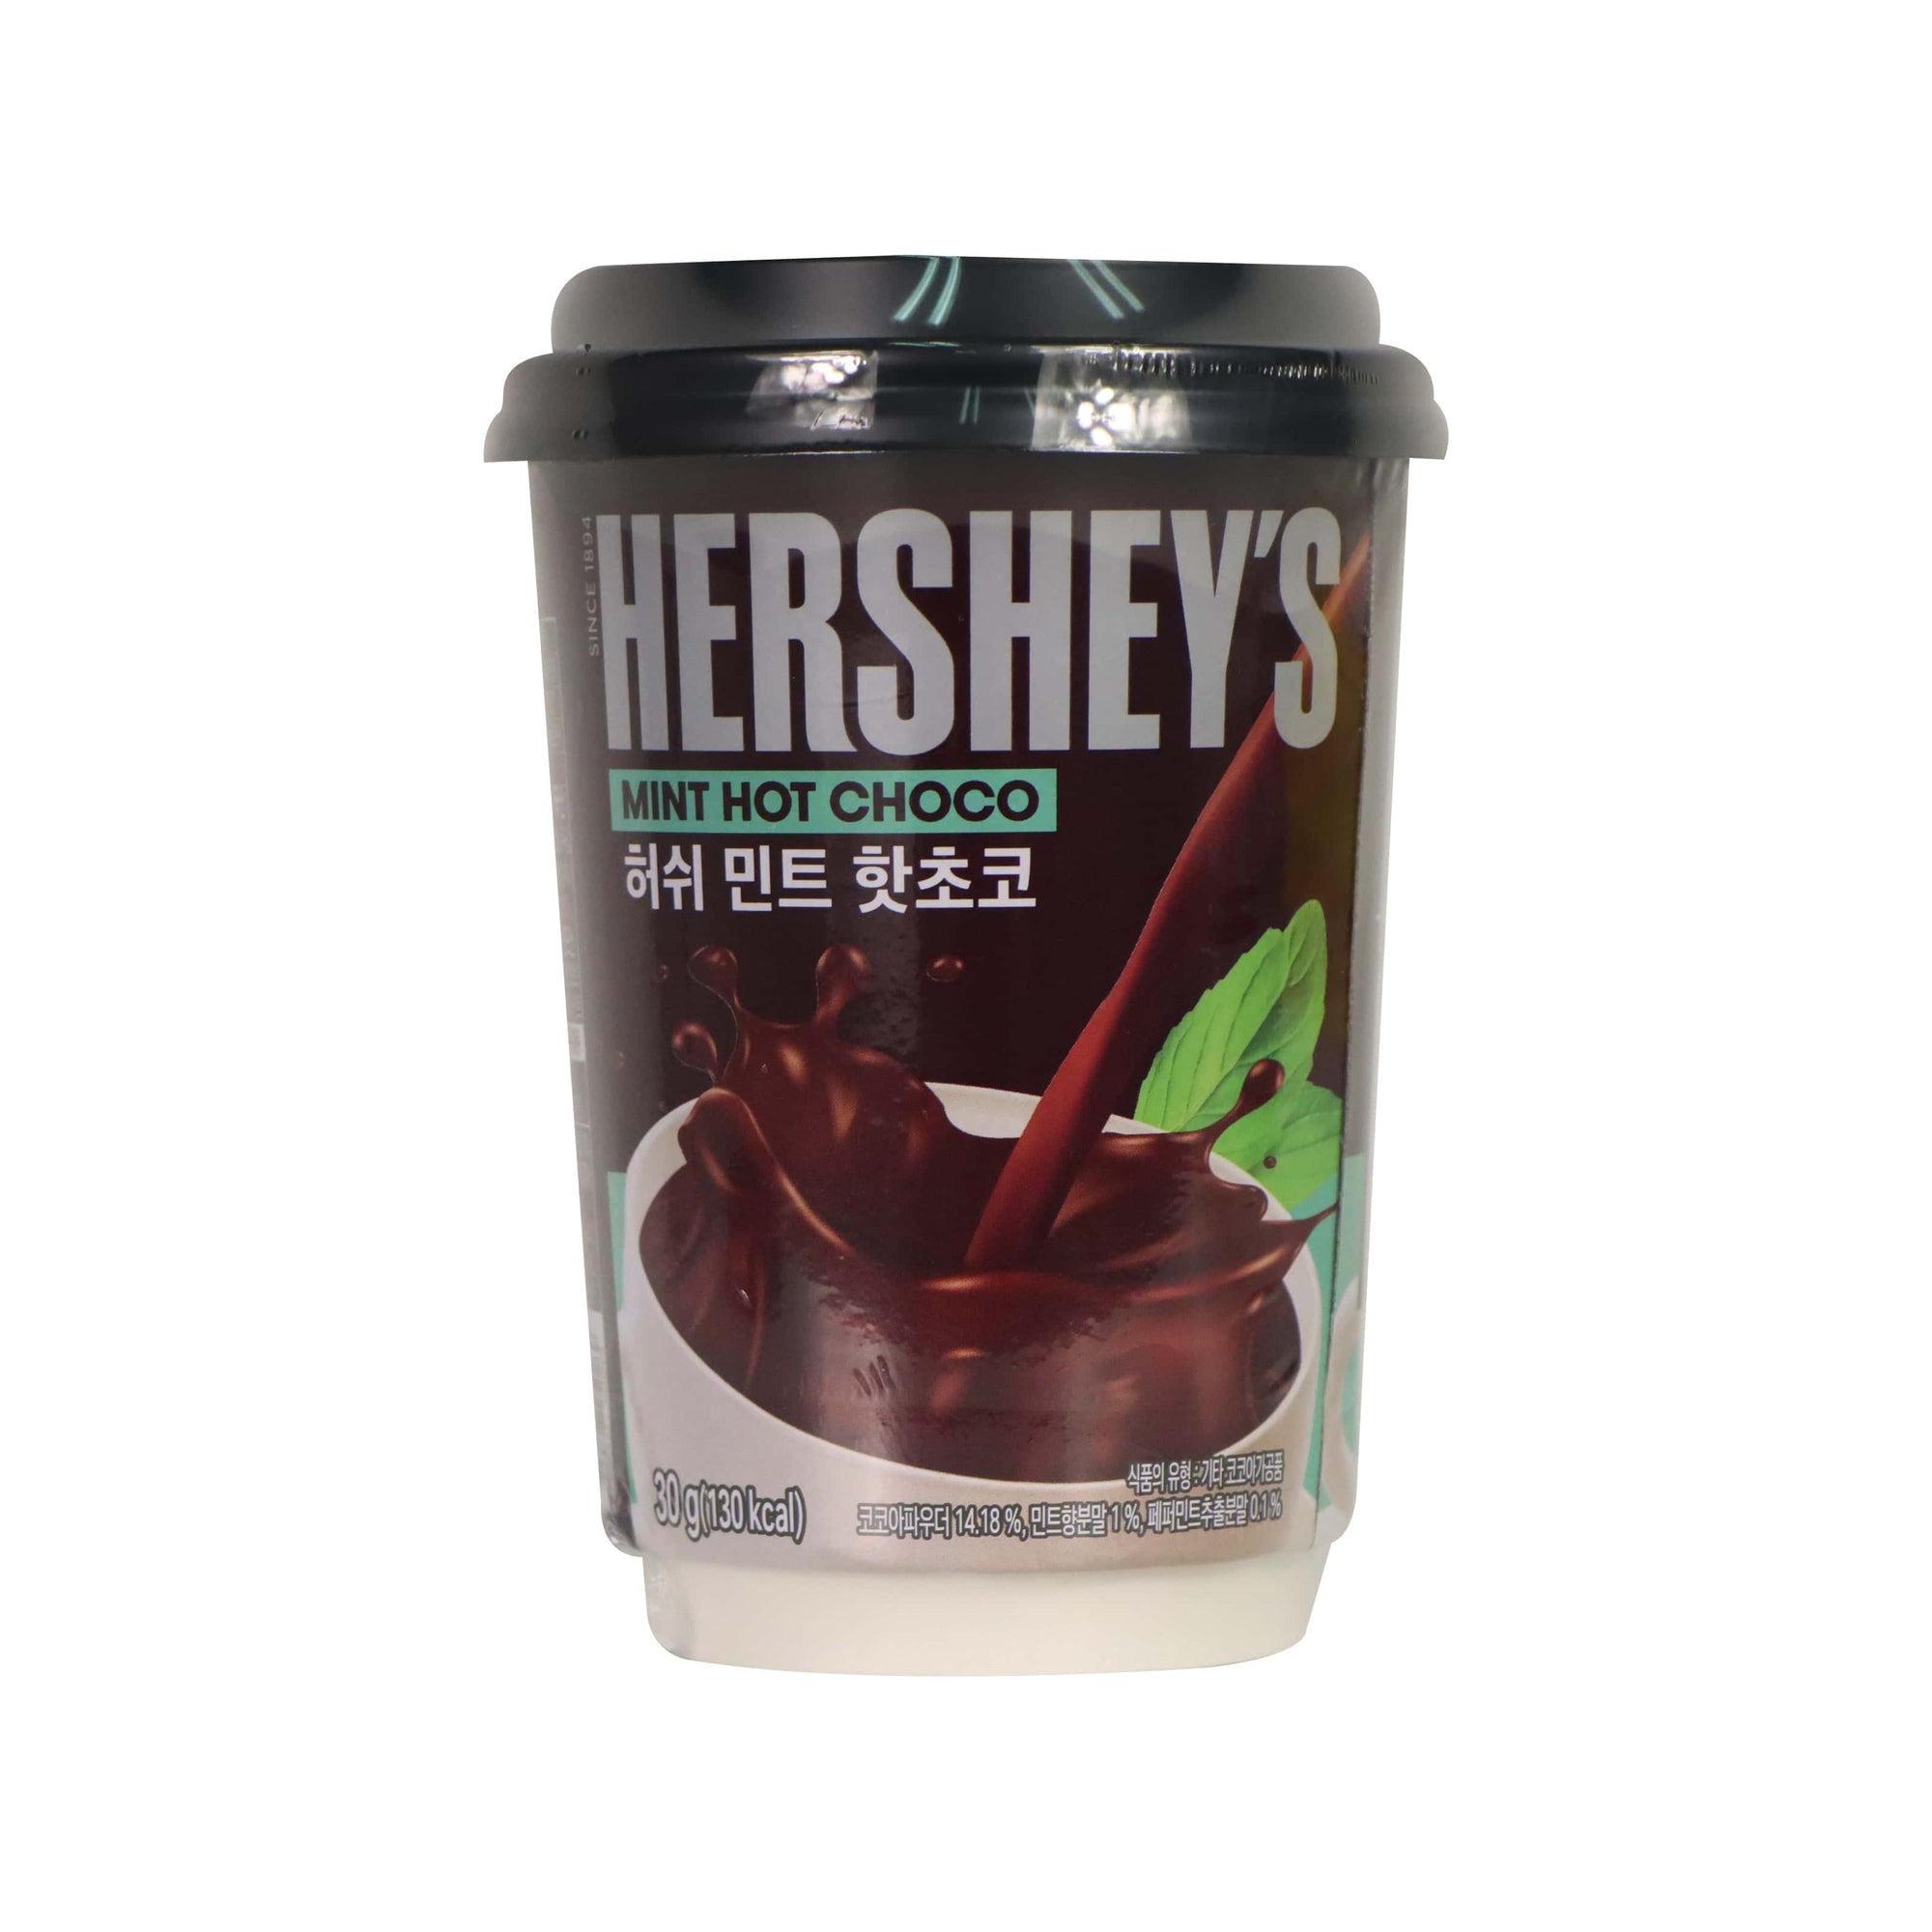 HERSHEY's Mint Hot Chocolate Cup 30g